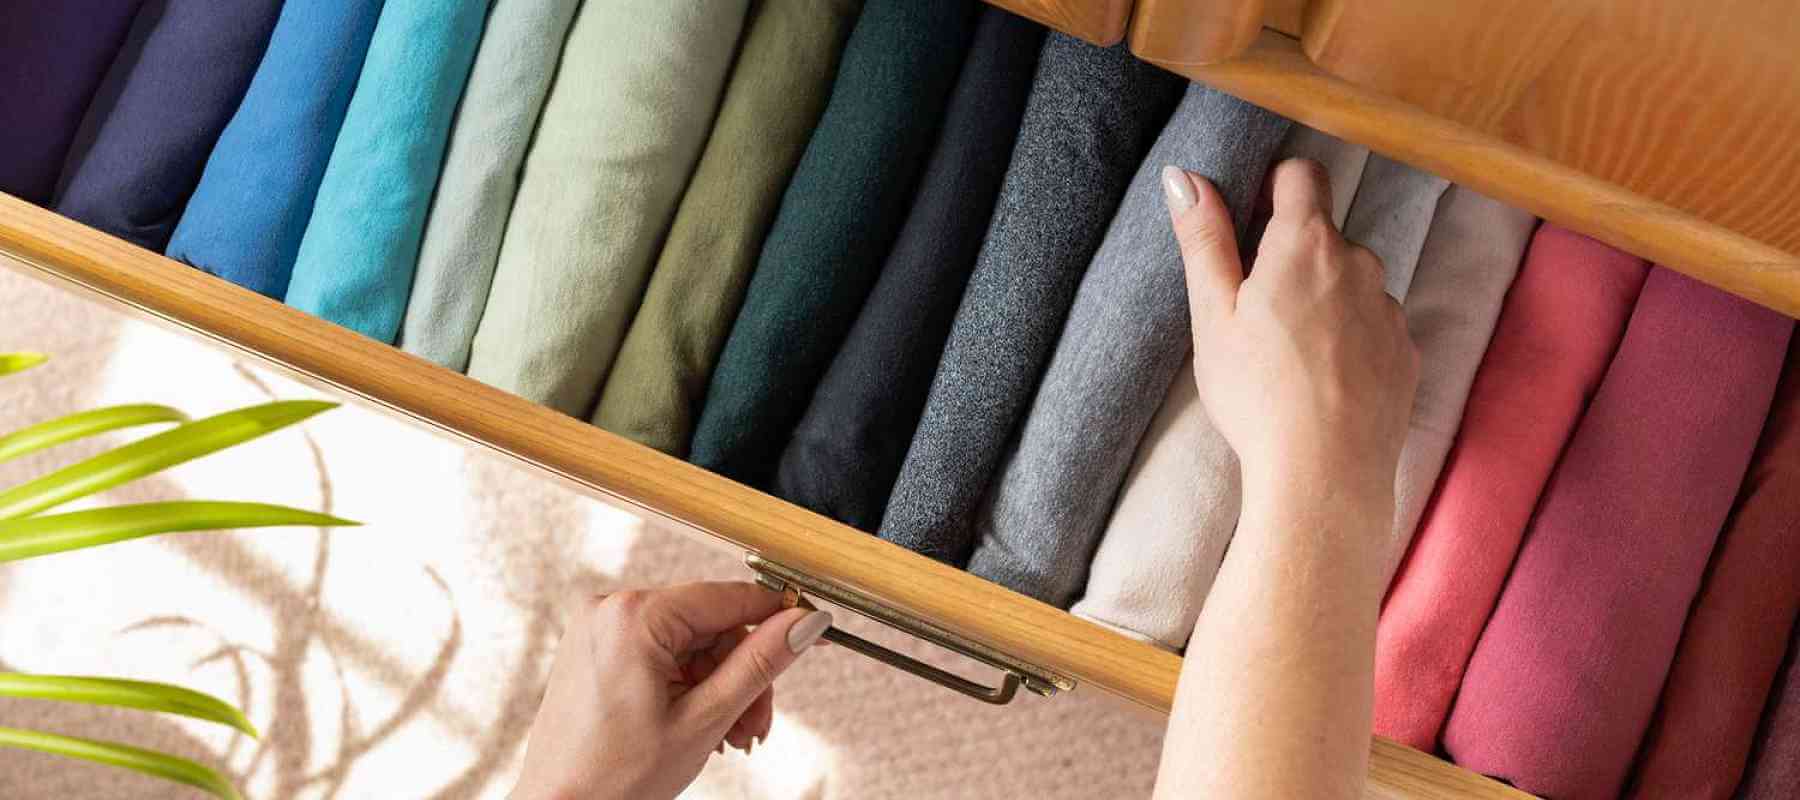 Keeping Your Home Organized Is Tough: Here Are Five Simple Tips